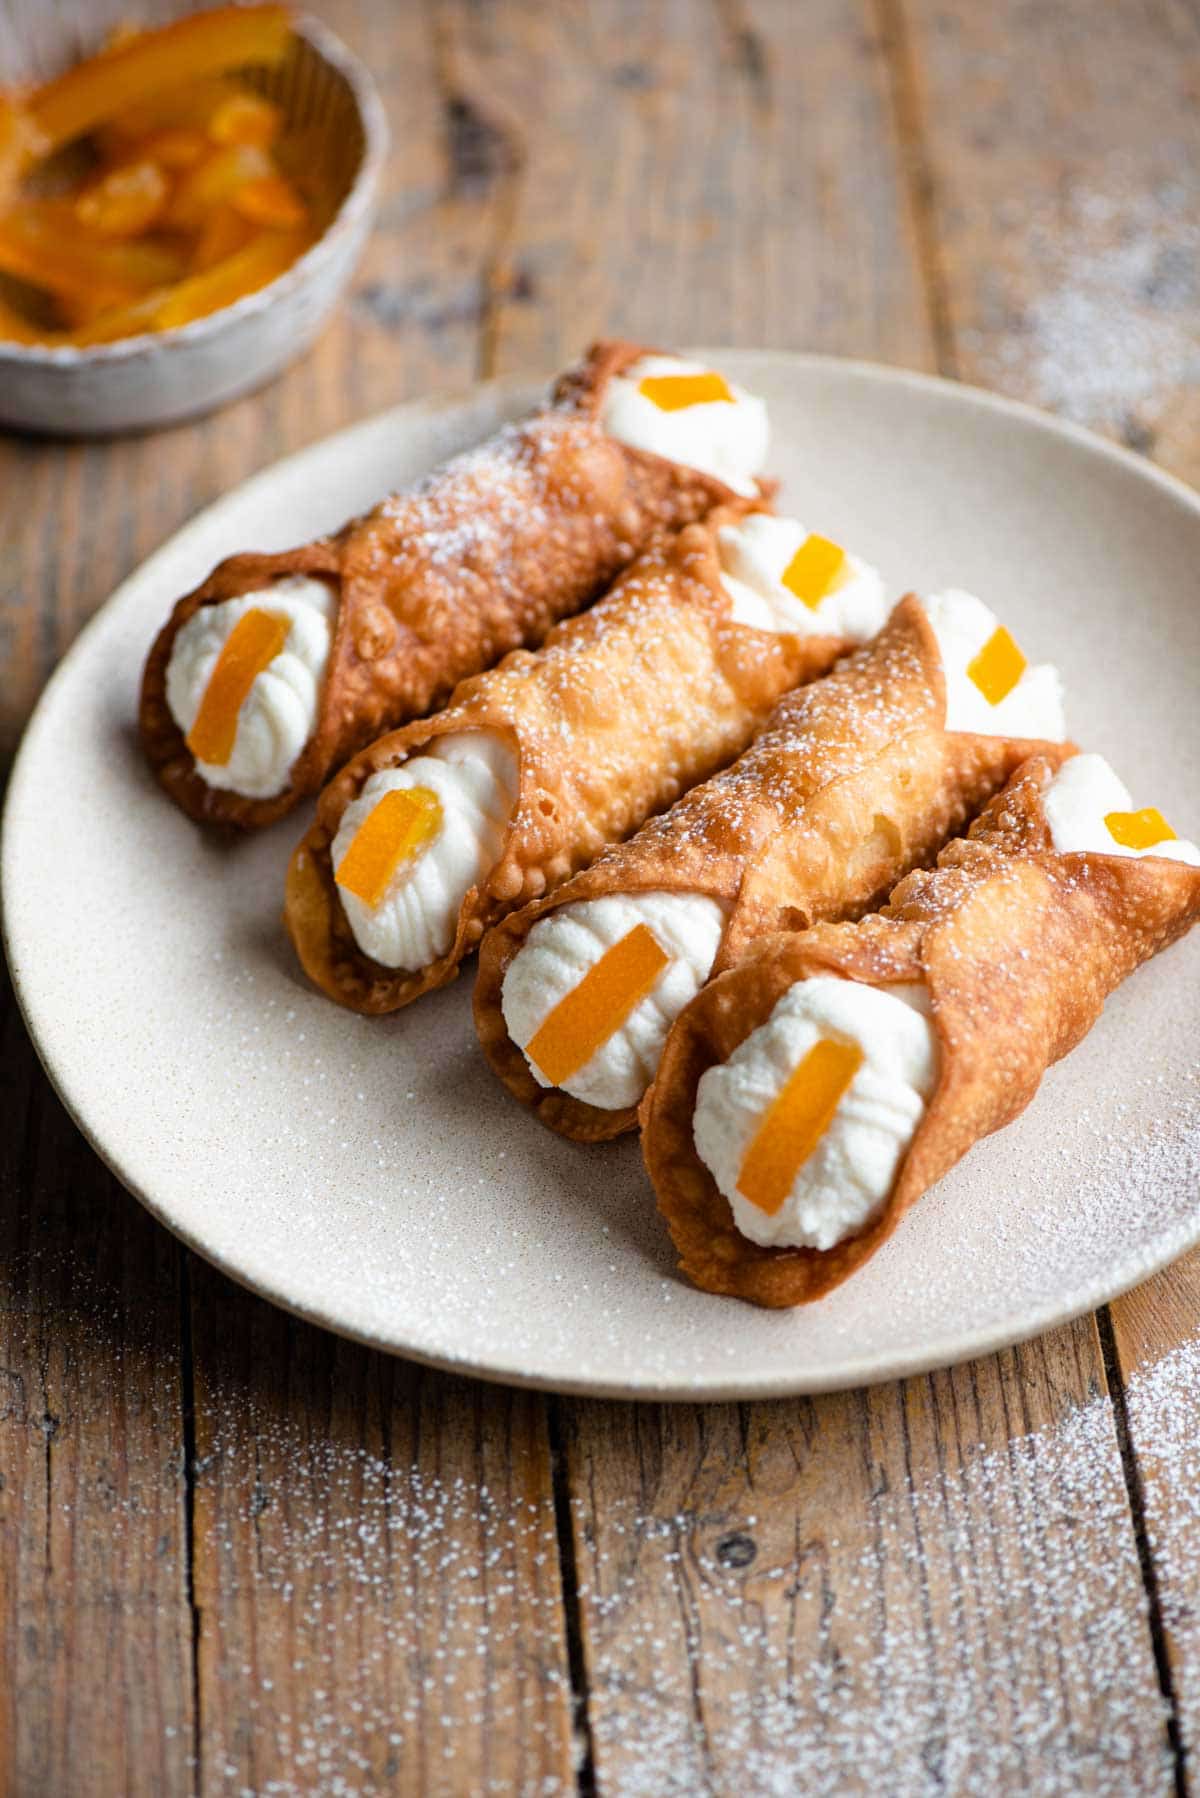 Four cannoli on a plate filled with ricotta and a slice of candied orange